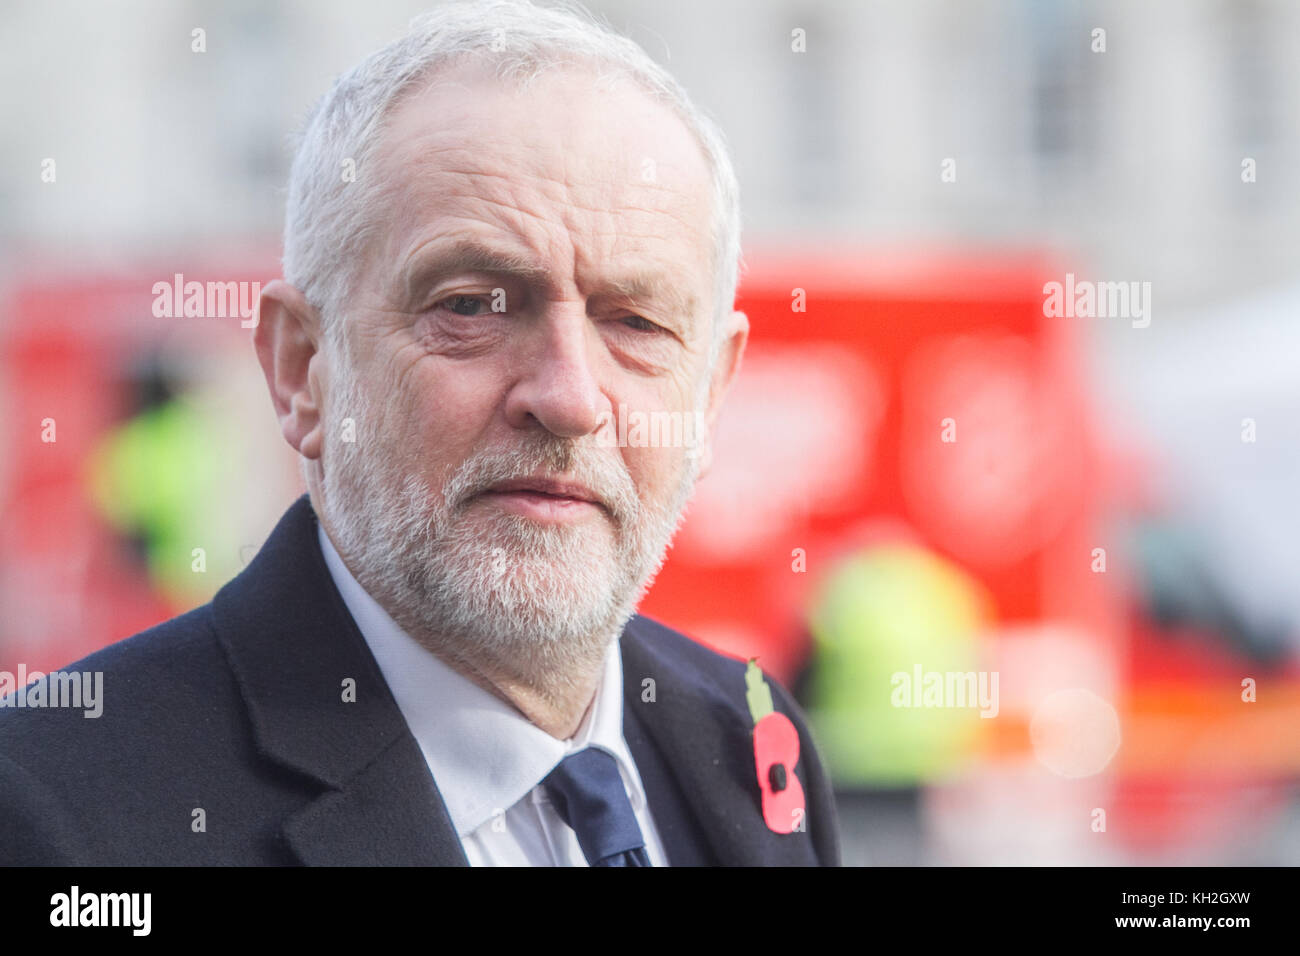 London UK. 12th November 2017. British Labour party leader Jeremy Corbyn attends Remembrance Sunday commemorations in Whitehall Credit: amer ghazzal/Alamy Live News Stock Photo